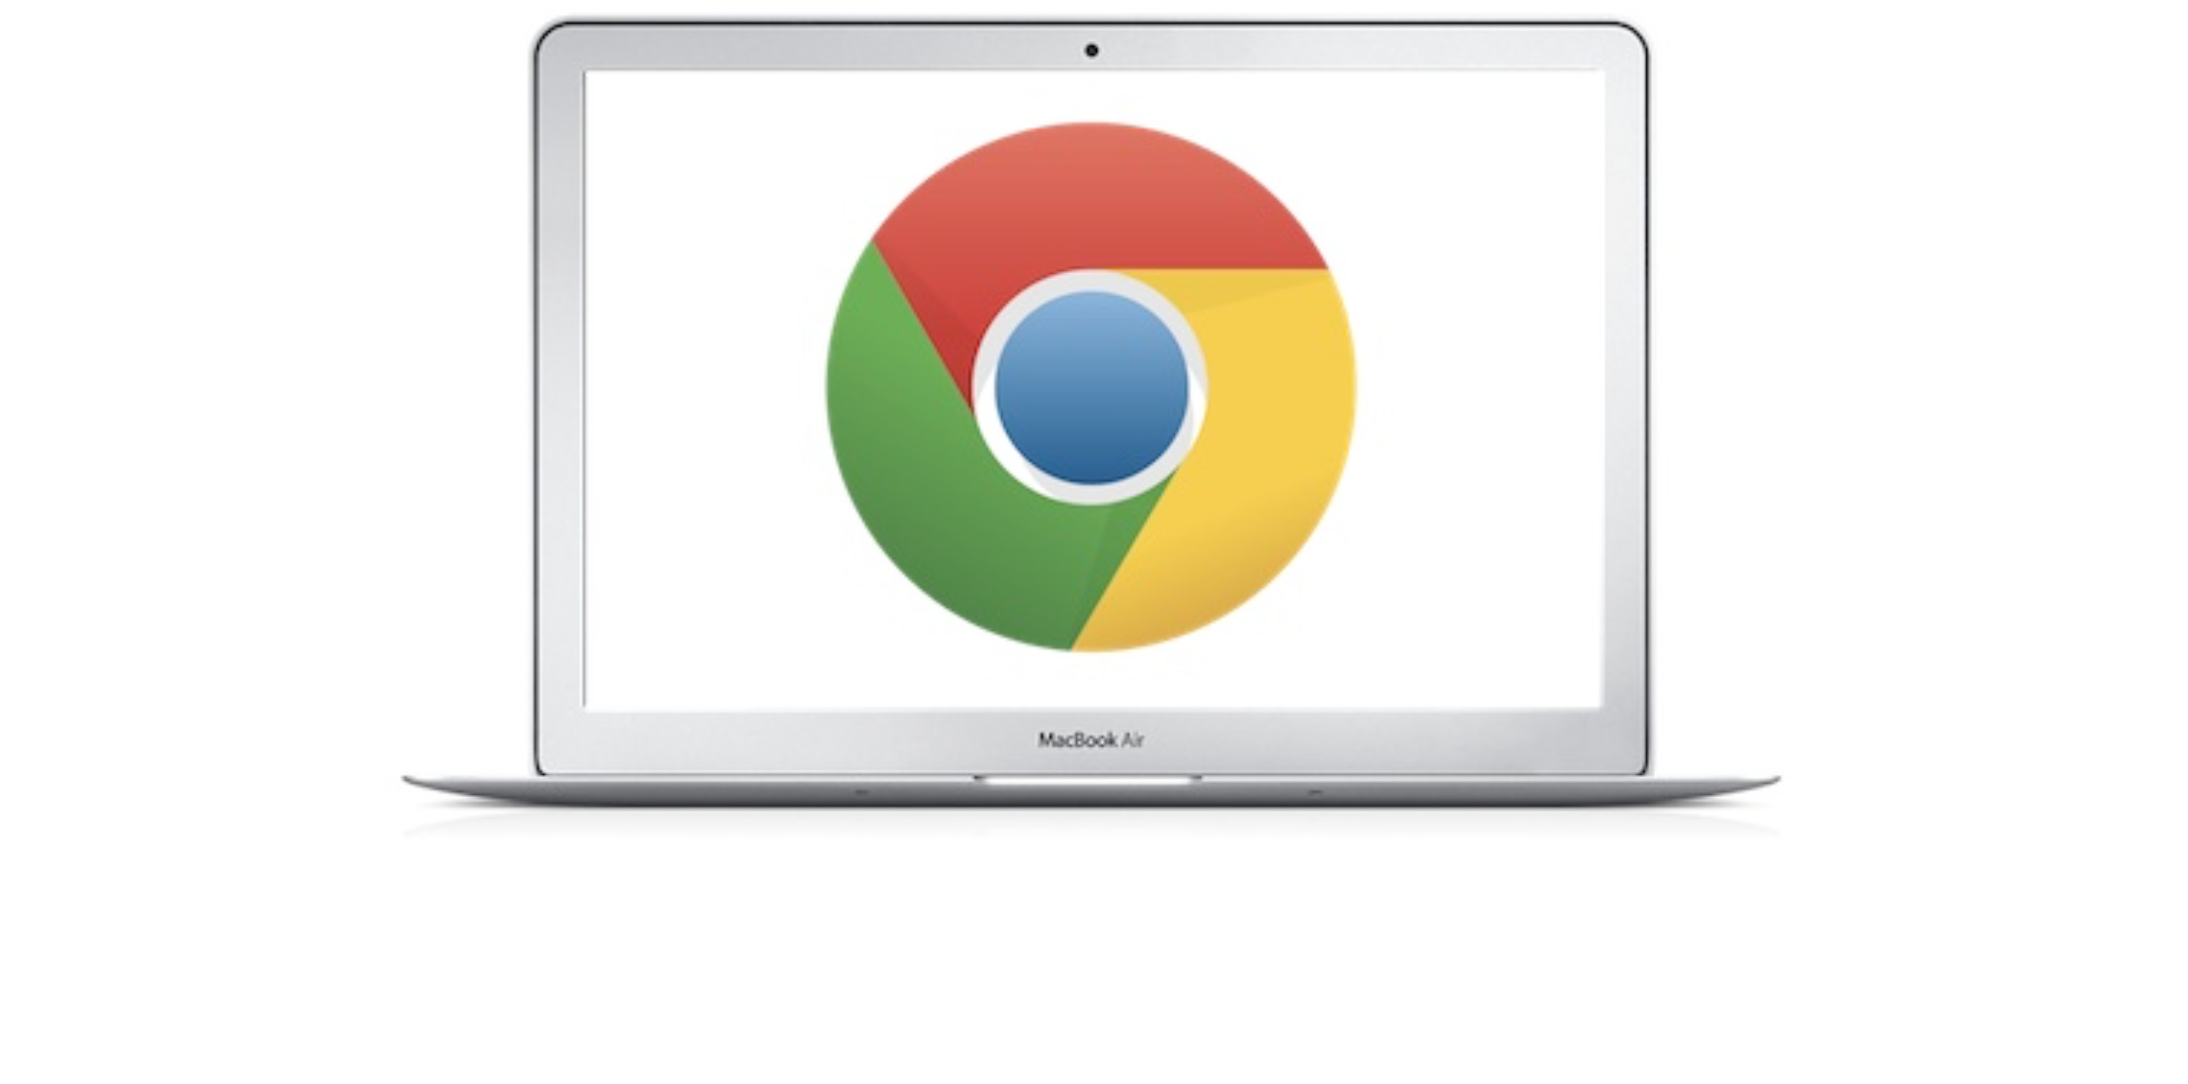 Google Chrome 114.0.5735.134 for iphone download